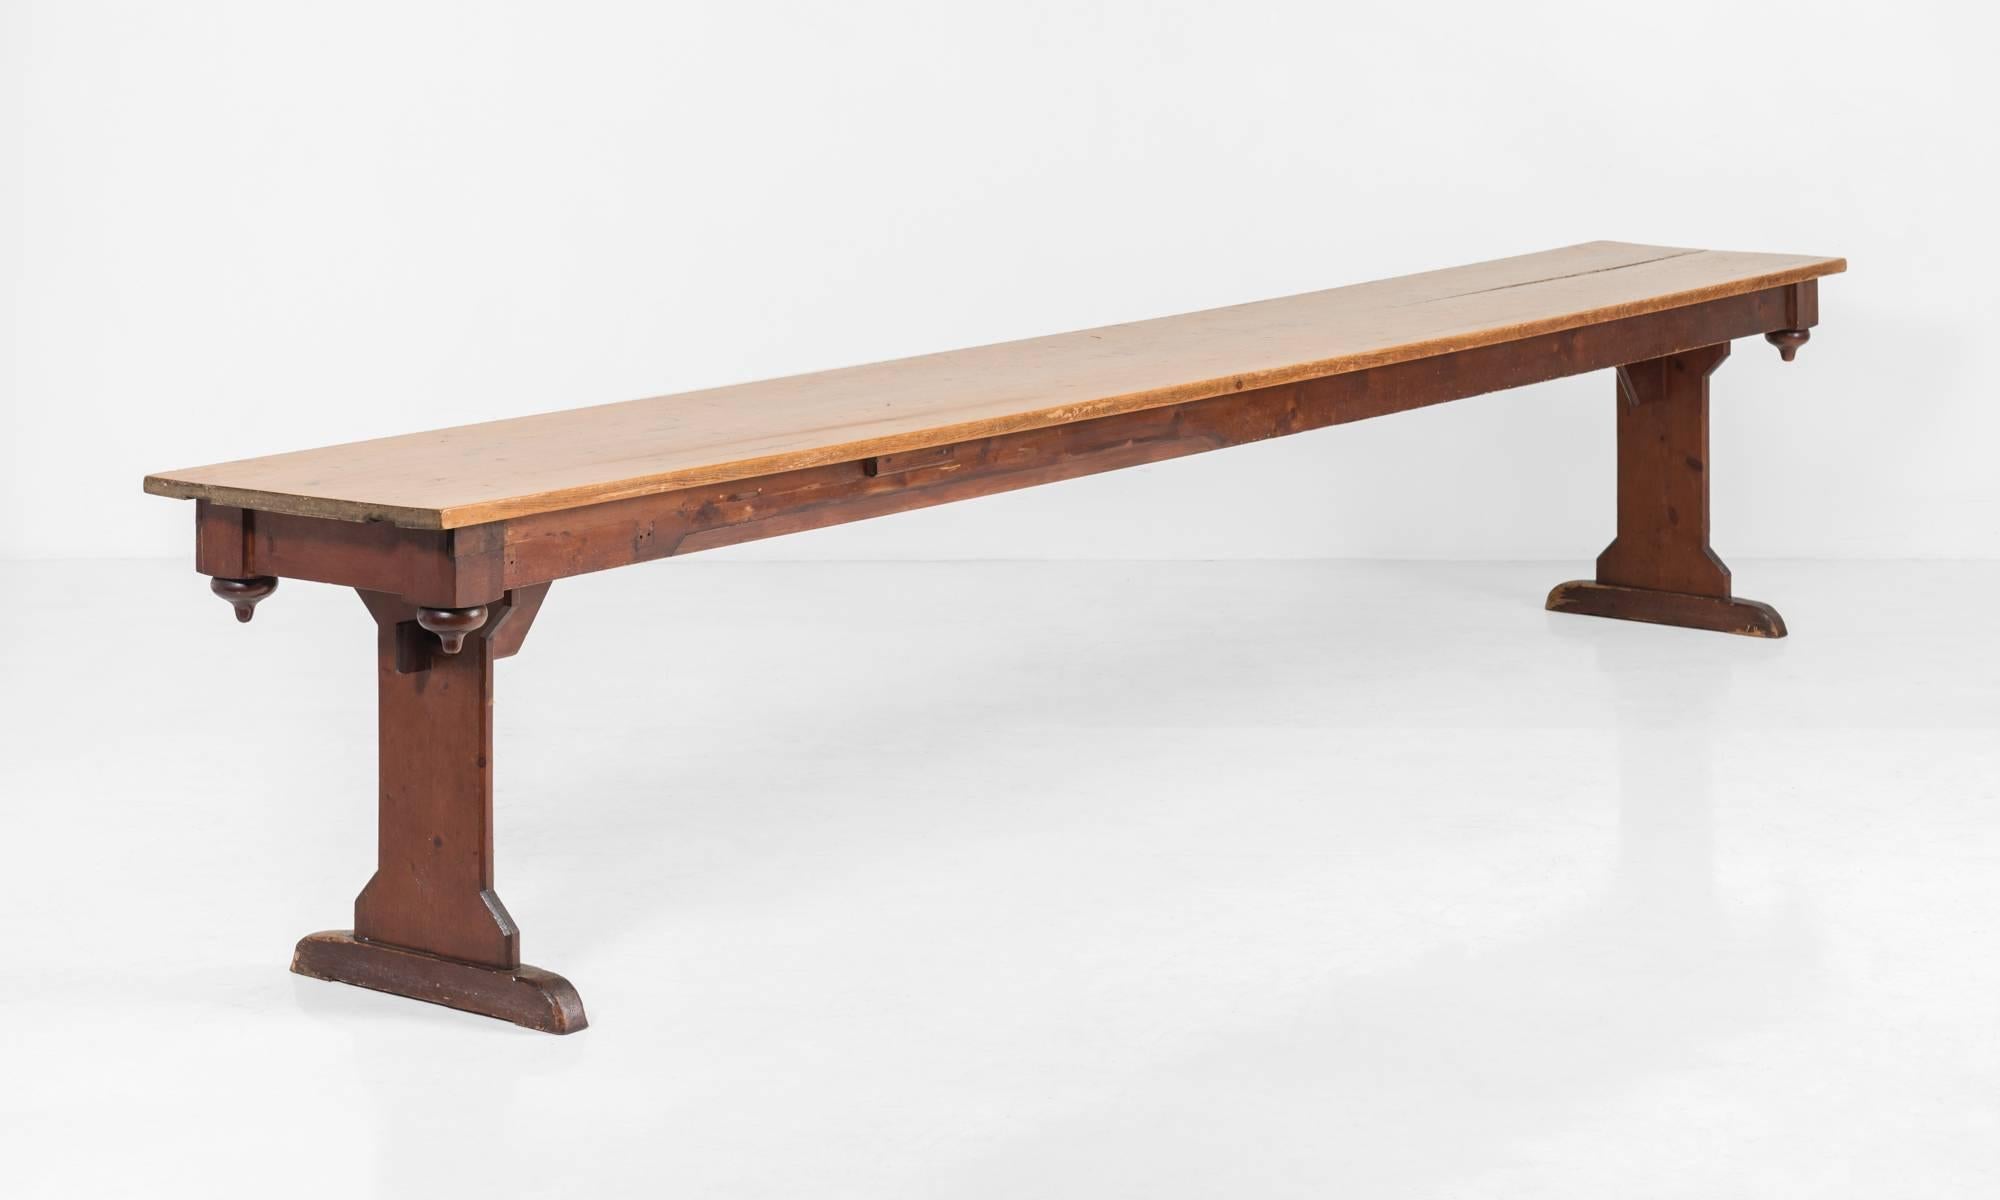 Pine Refectory Dining Tables, England, circa 1900

Impressive scale with beautiful patina and elegant details.